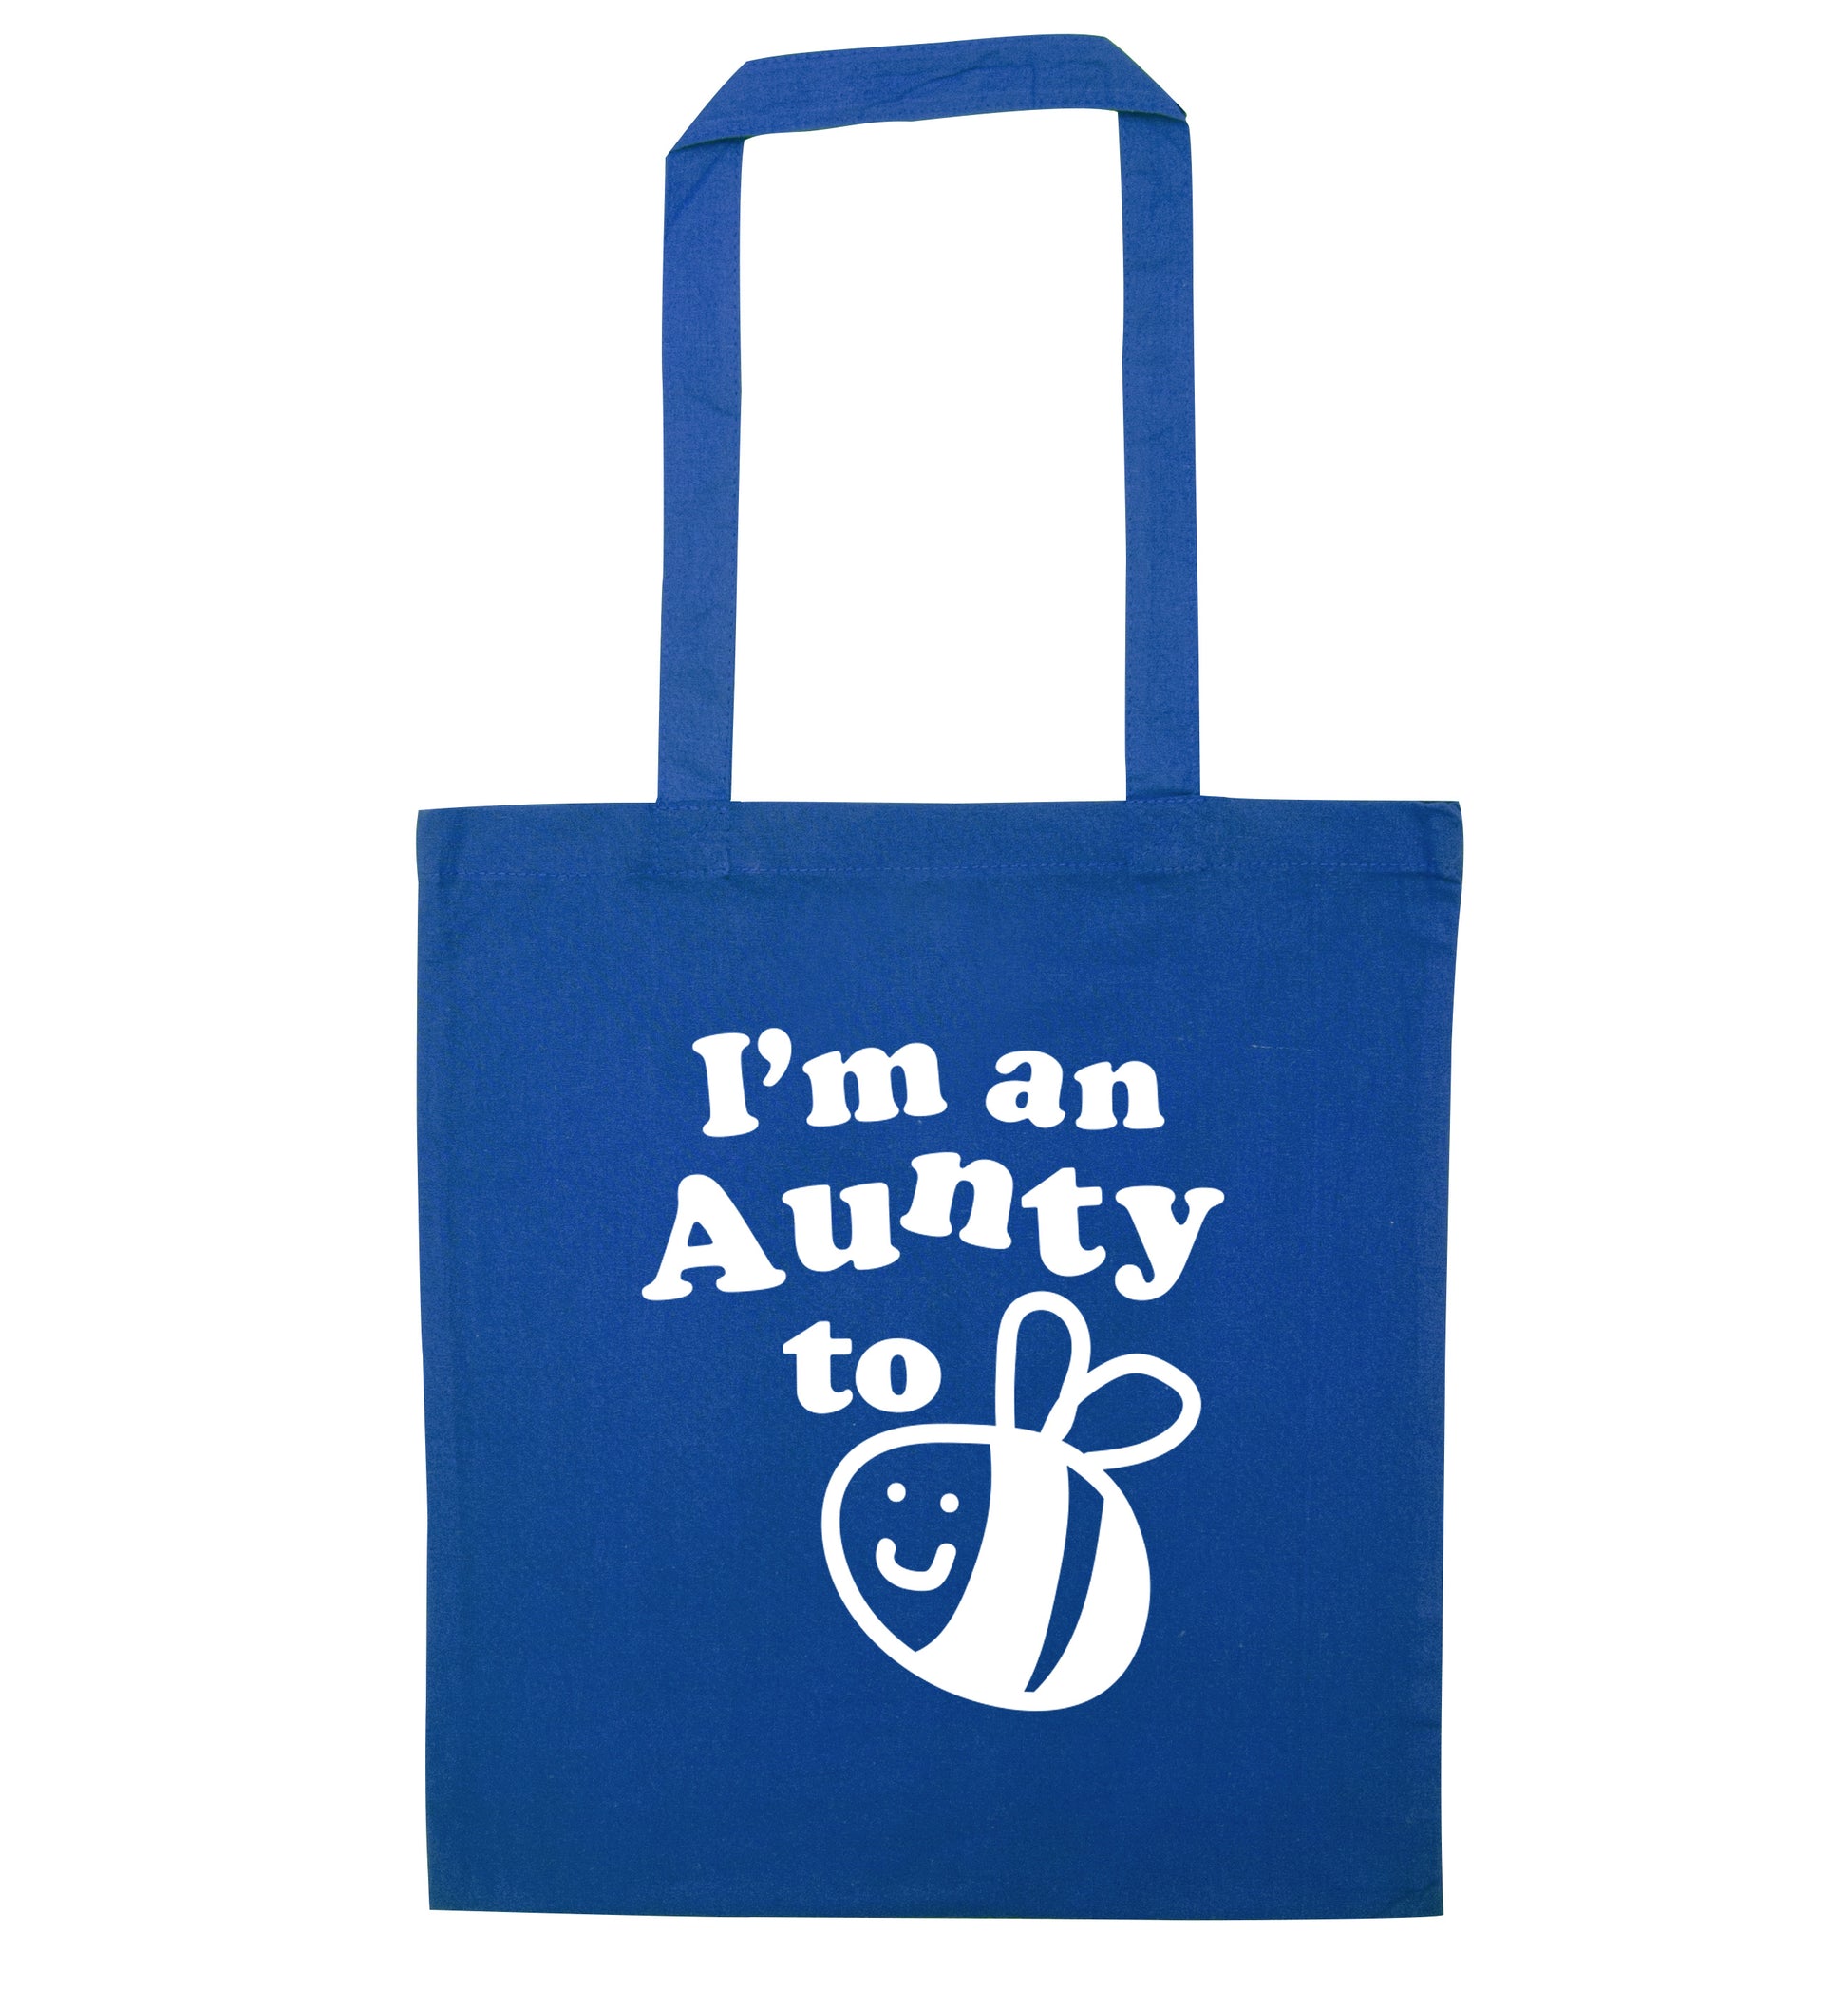 I'm an aunty to be blue tote bag